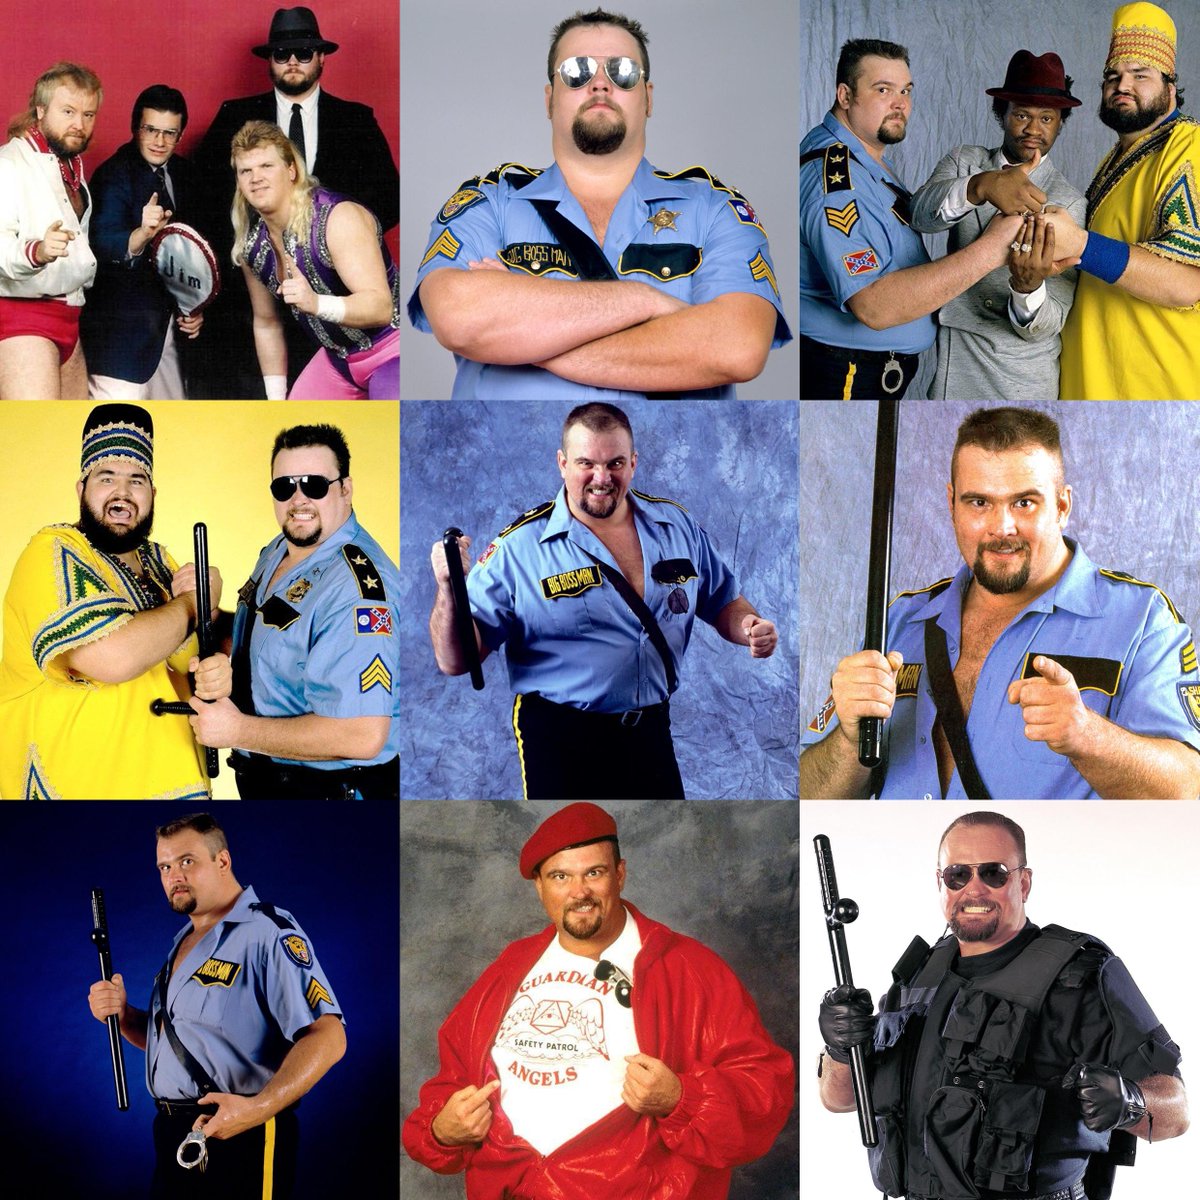 On his birthday, we remember the legendary talent of the Big Boss Man! #WWF #WWE #Wrestling #BigBubbaRogers #RayTraylor